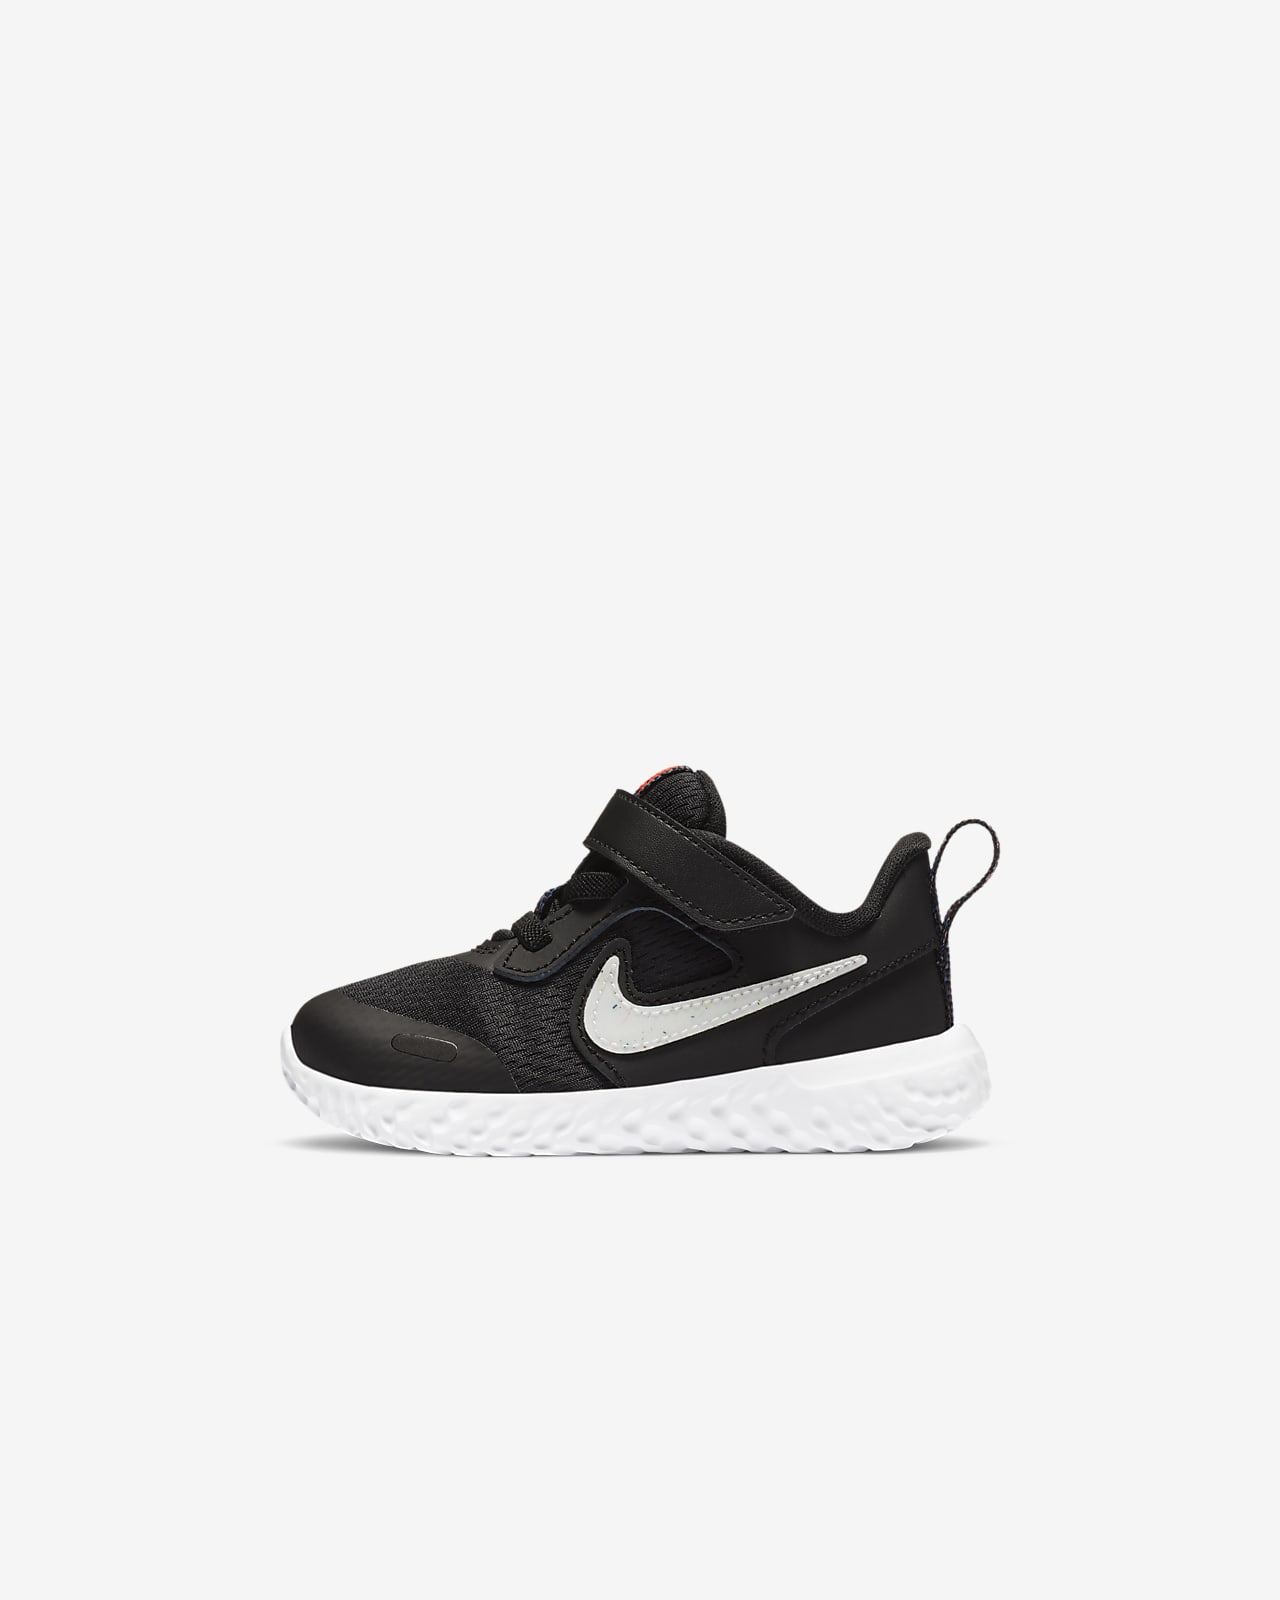 Nike Revolution 5 SE Baby and Toddler 